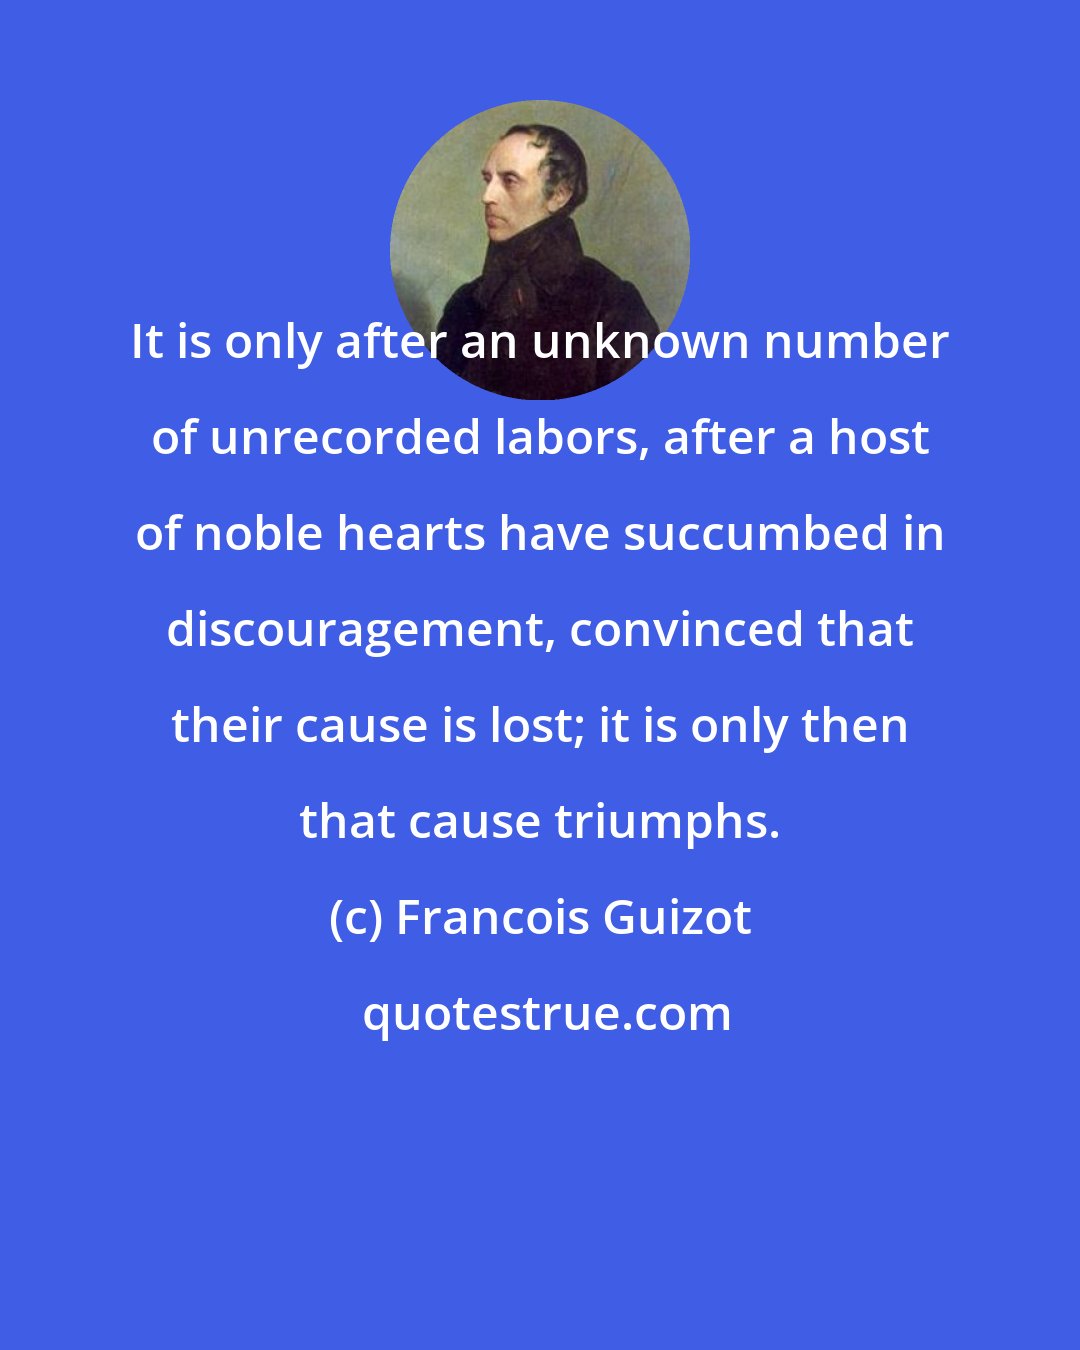 Francois Guizot: It is only after an unknown number of unrecorded labors, after a host of noble hearts have succumbed in discouragement, convinced that their cause is lost; it is only then that cause triumphs.